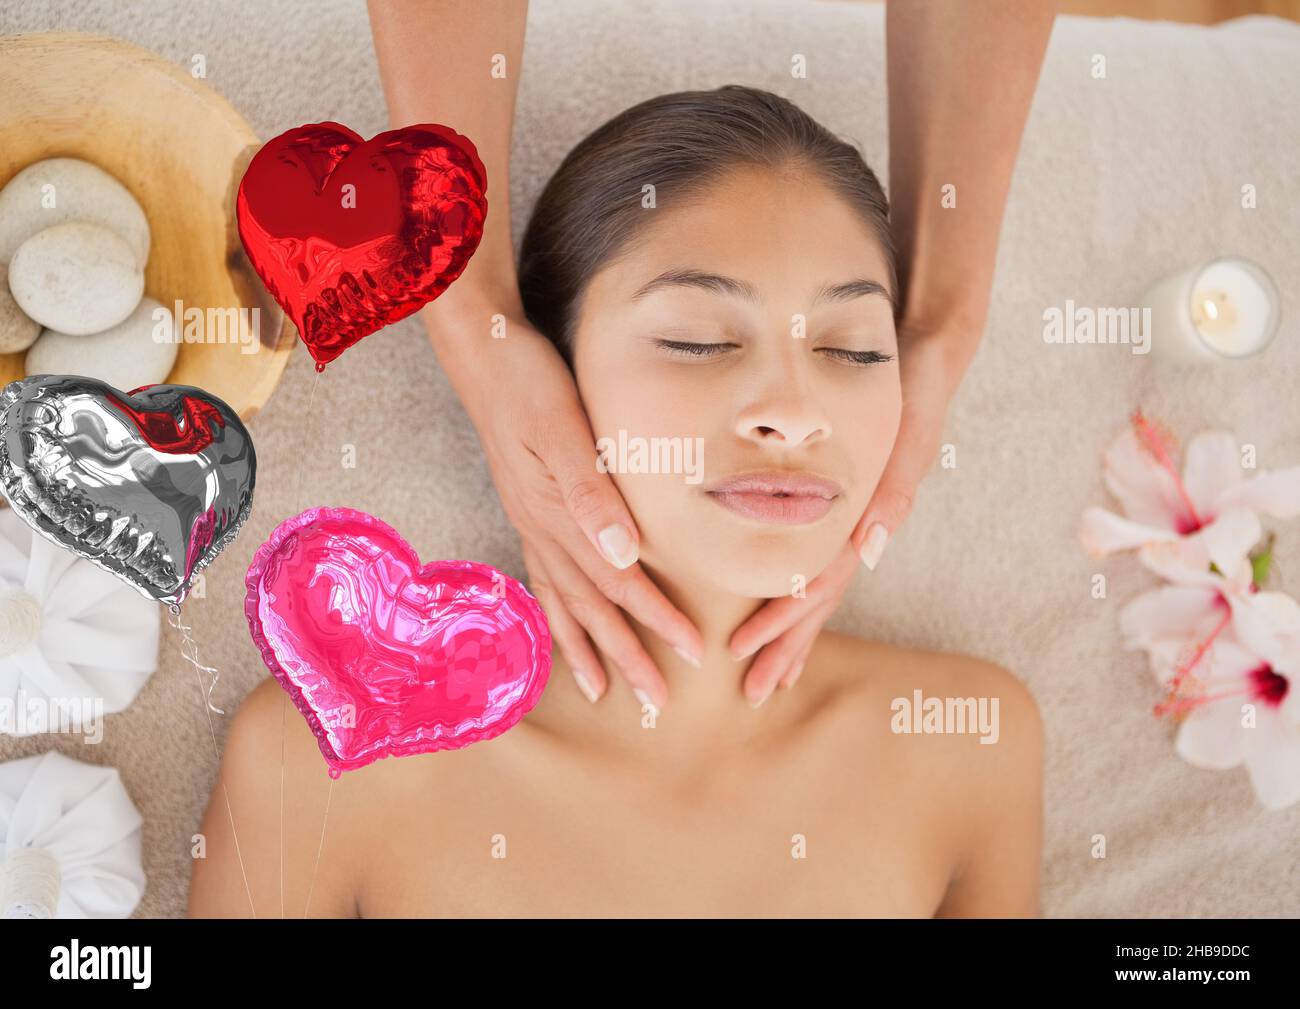 Composite image of red heart shaped foil balloons against woman receiving a neck massage at a spa Stock Photo